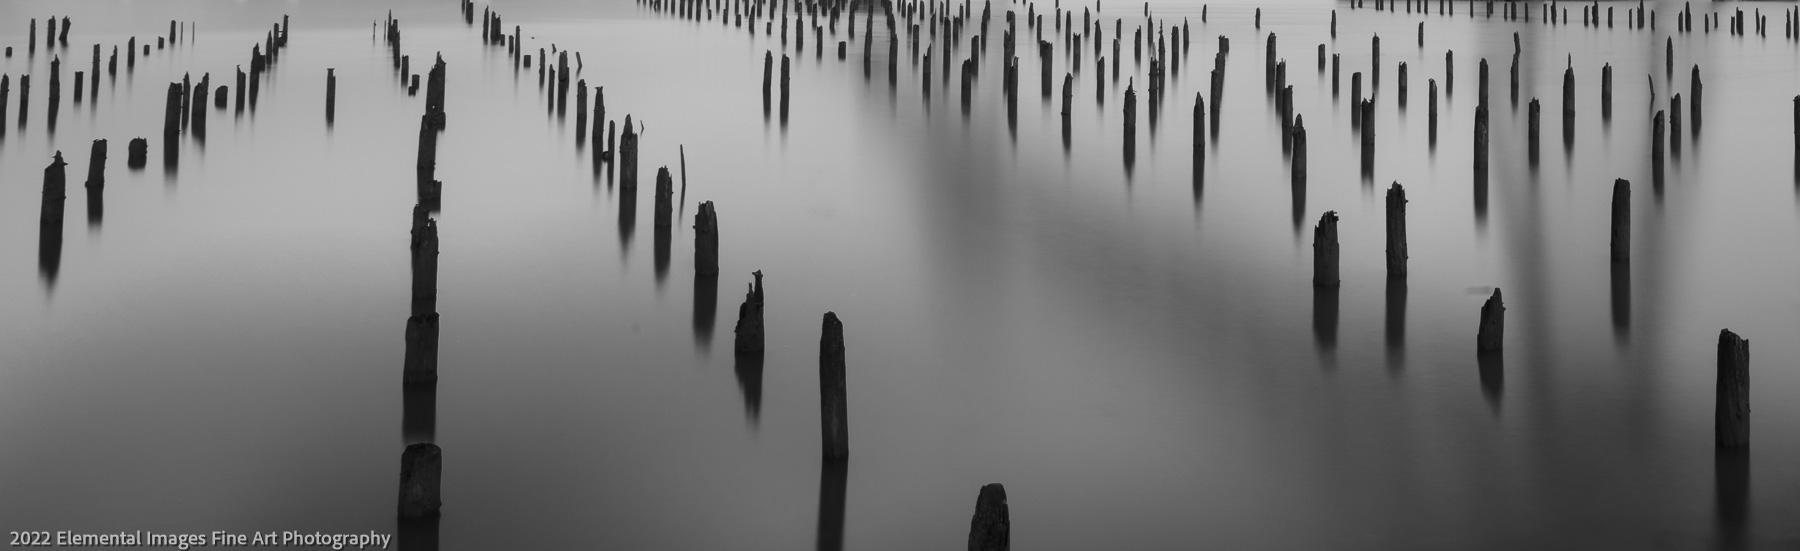 Pier Posts on the Columbia | Astoria | OR | USA - © 2022 Elemental Images Fine Art Photography - All Rights Reserved Worldwide